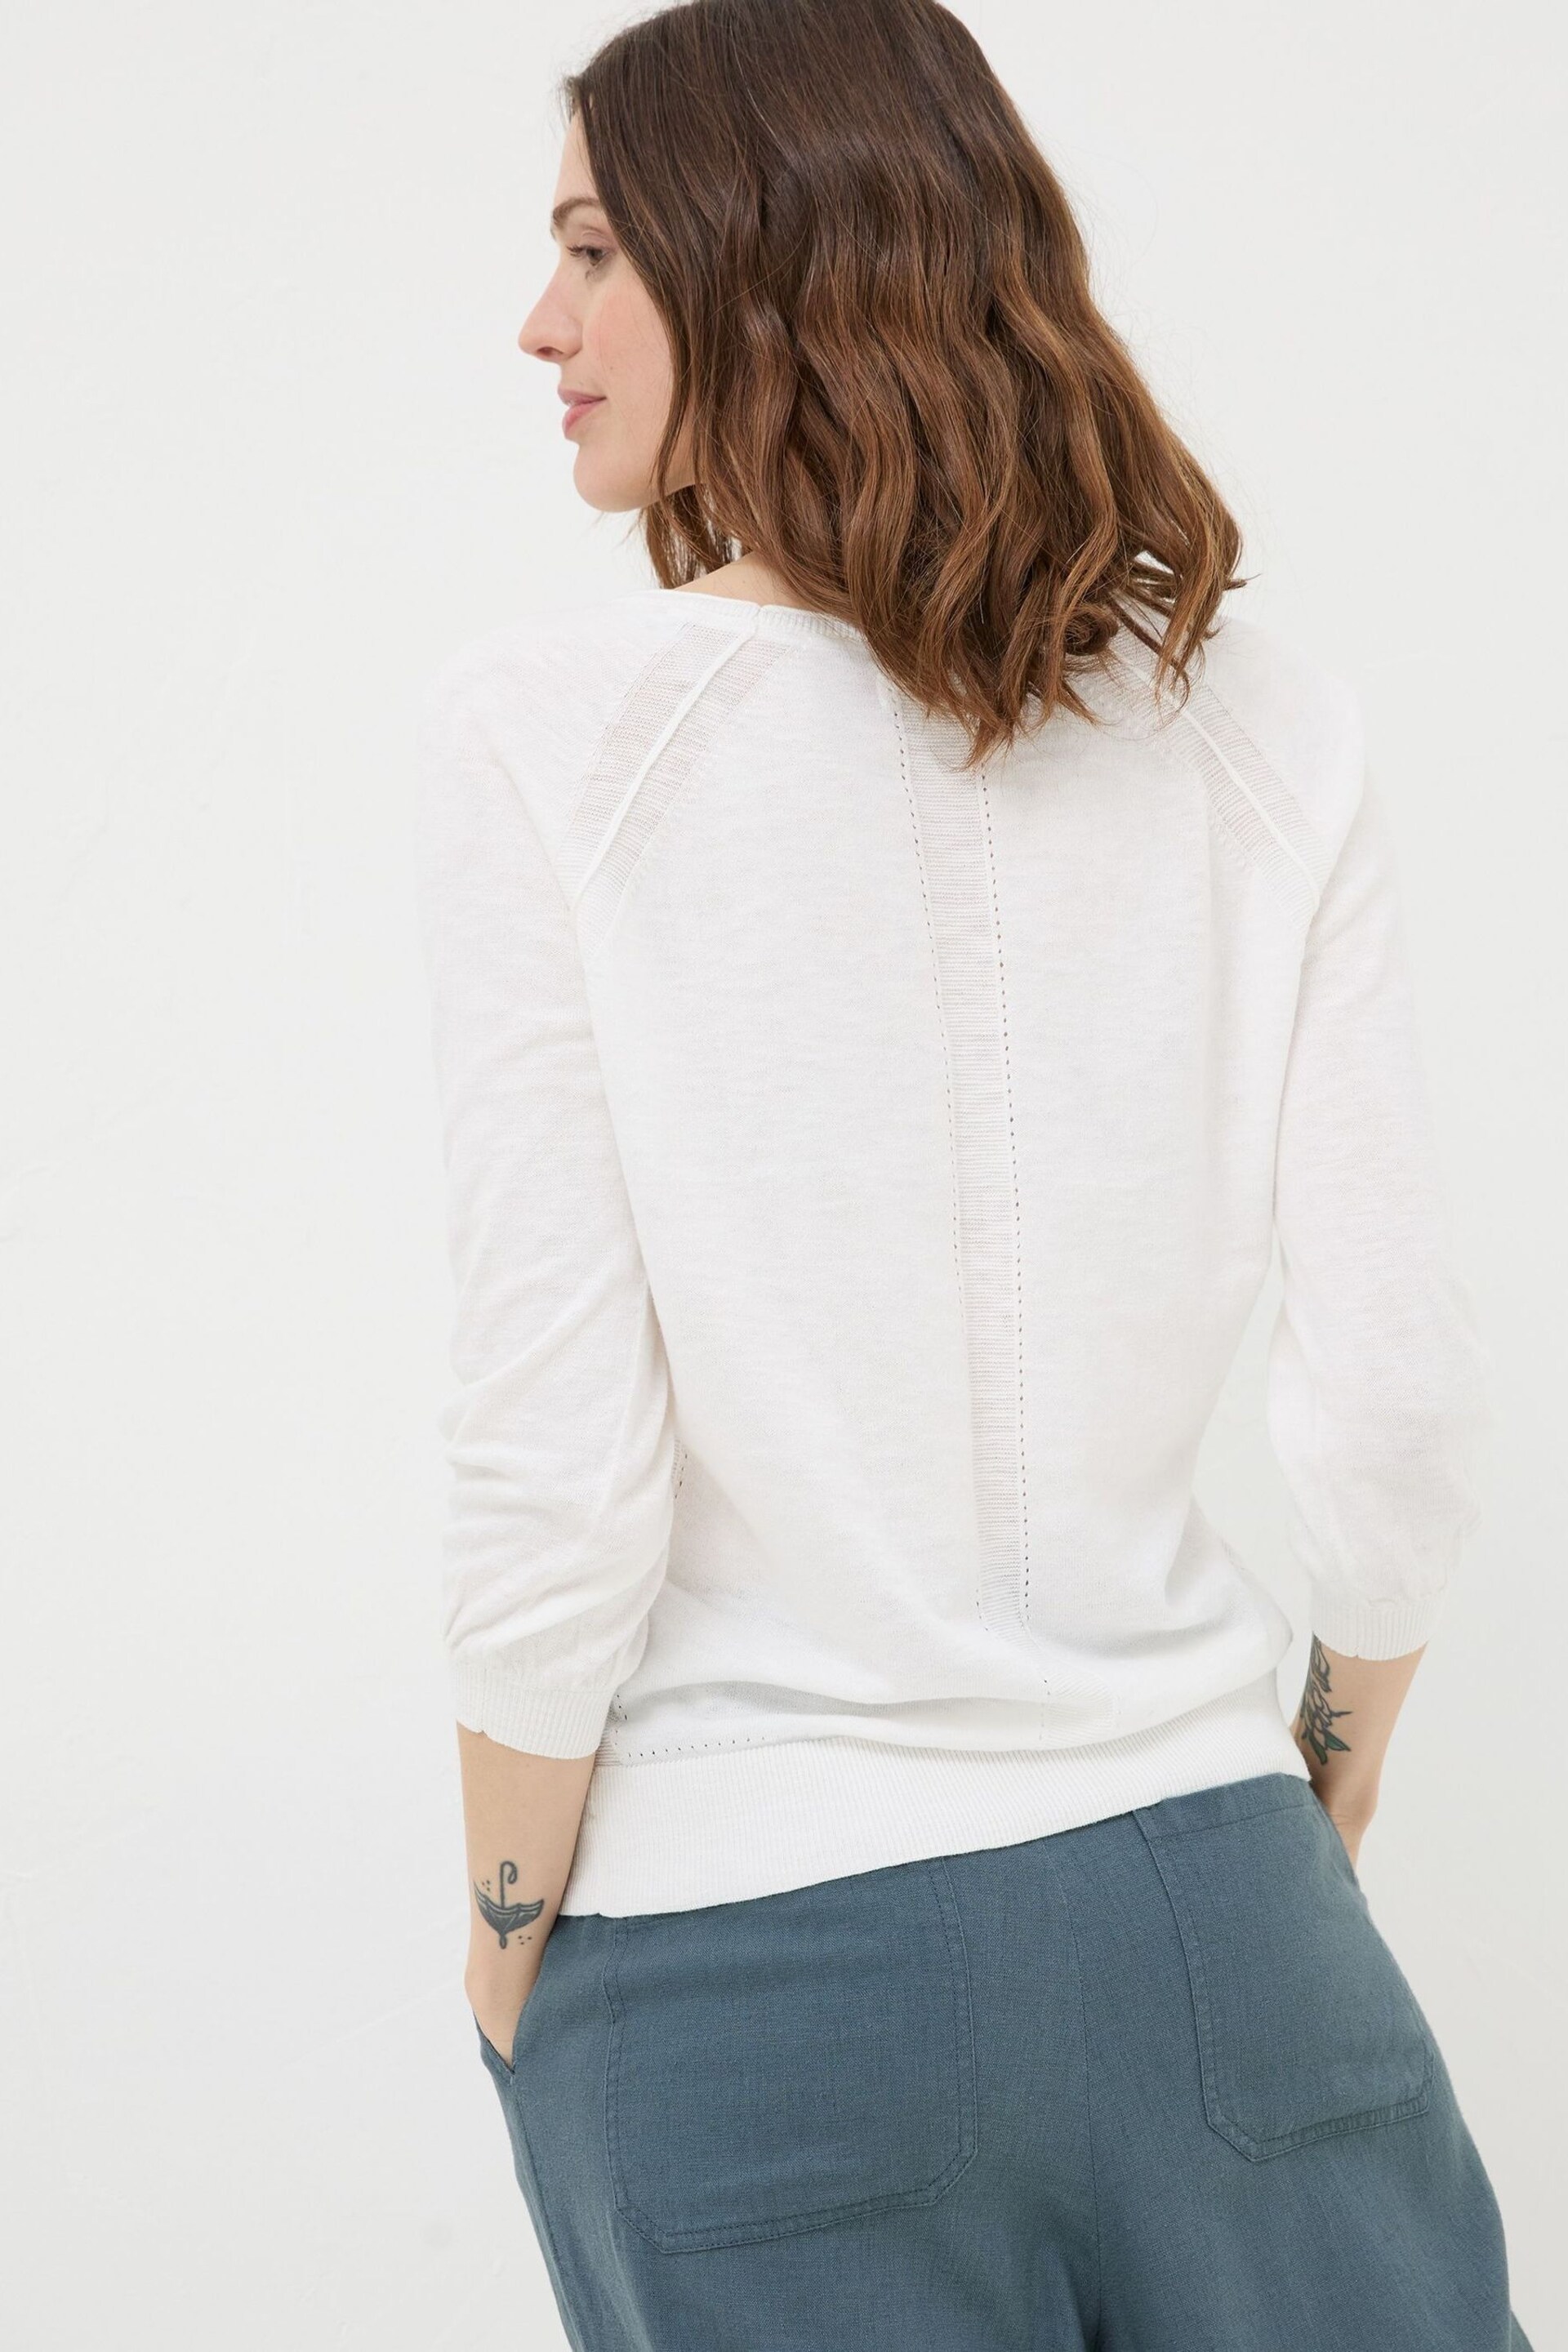 FatFace White Cardigan - Image 2 of 5